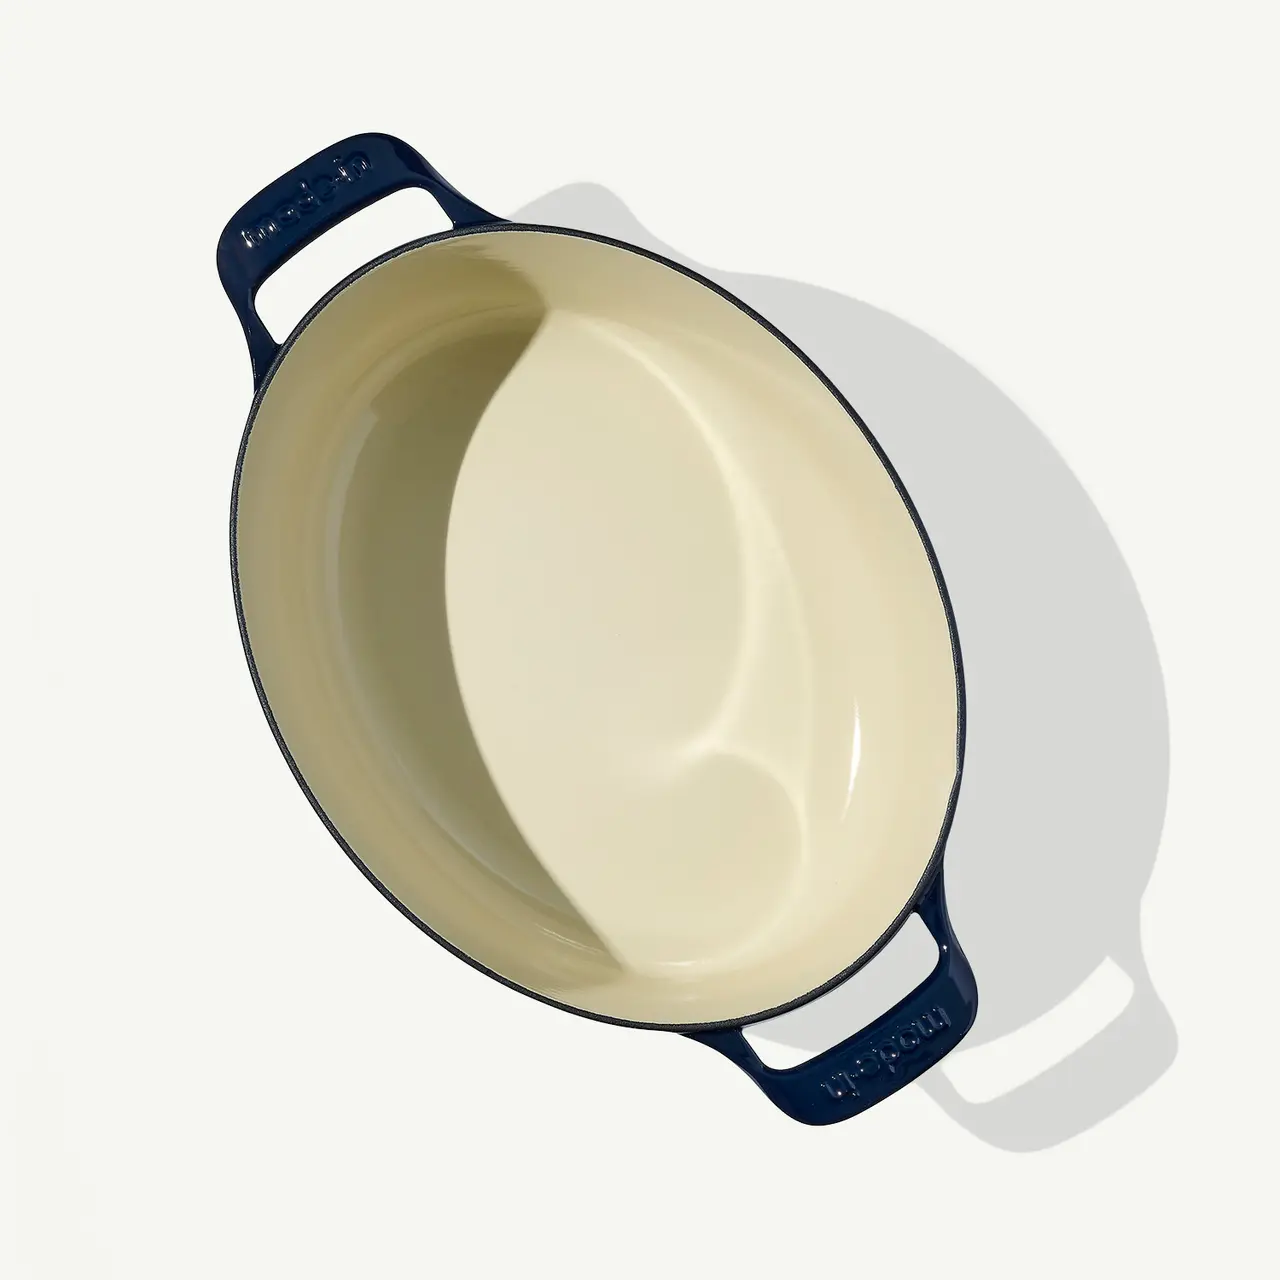 A cream-colored oval baking dish with dark blue handles rests on a light surface casting a soft shadow.